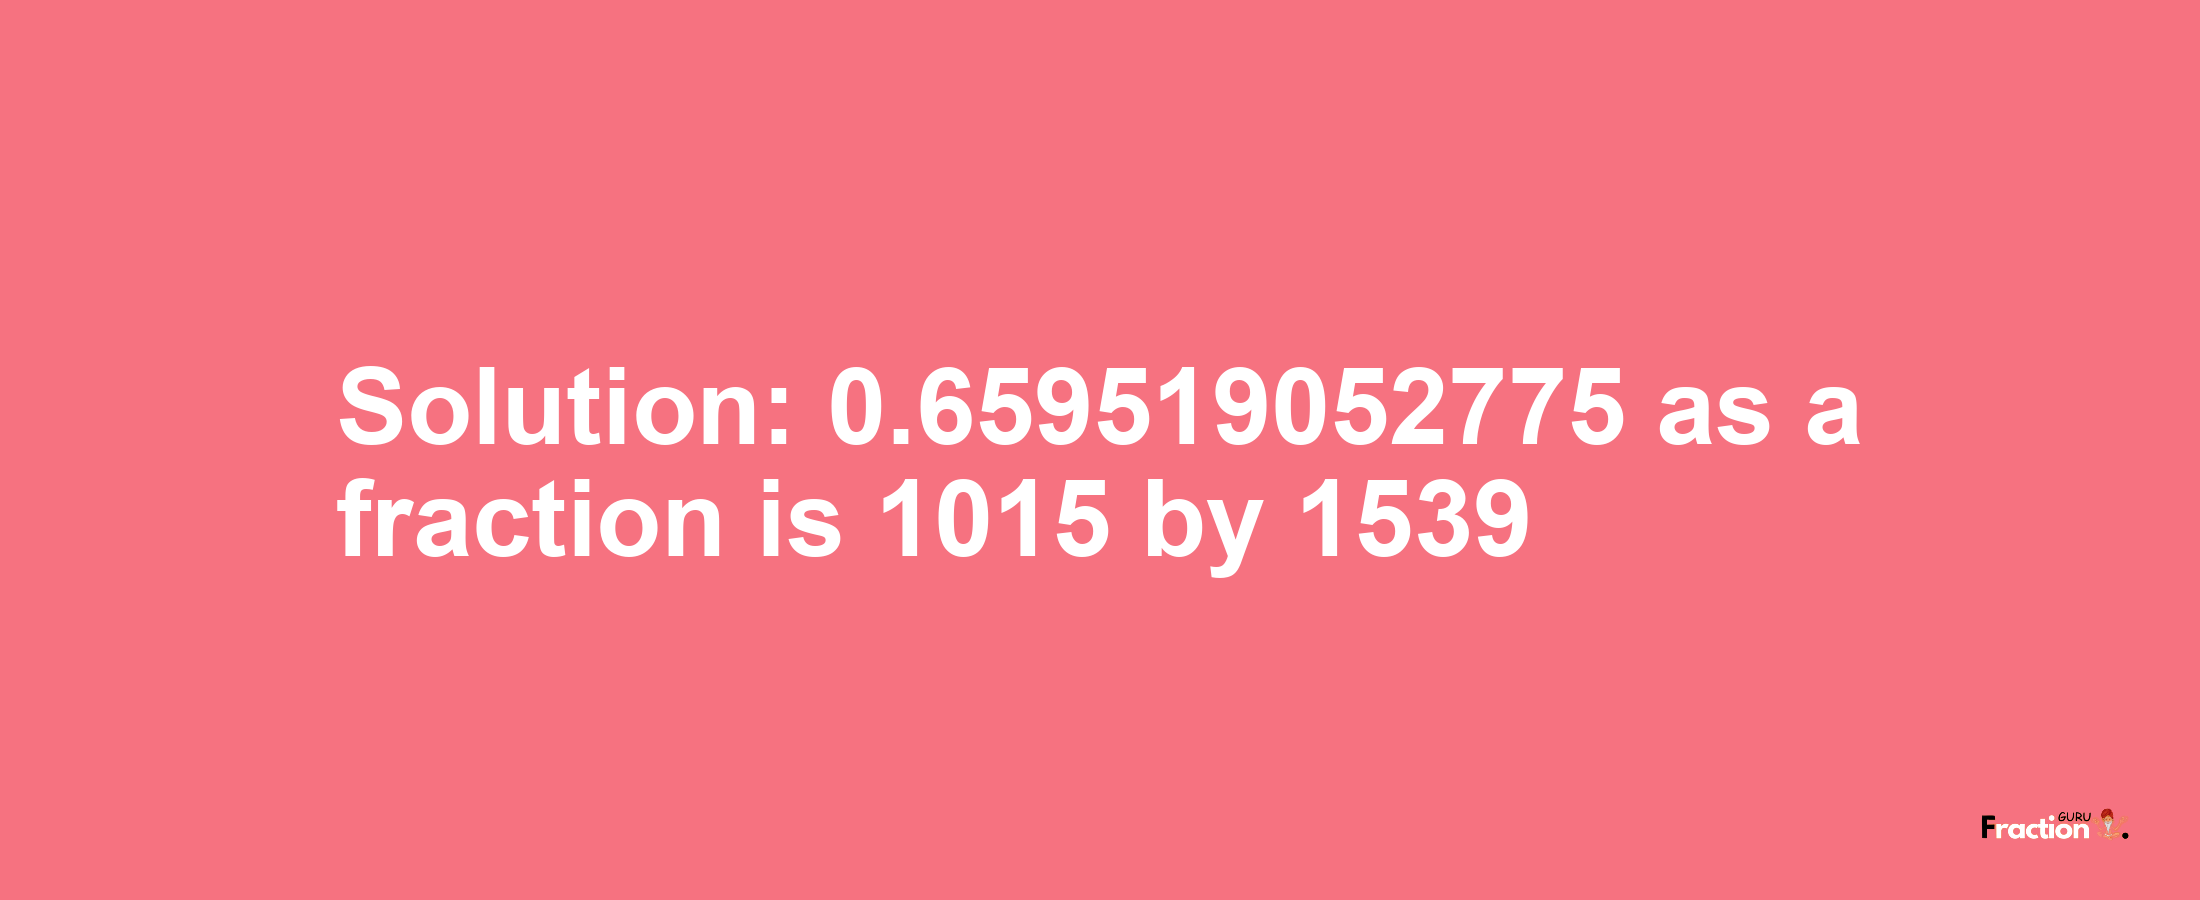 Solution:0.659519052775 as a fraction is 1015/1539